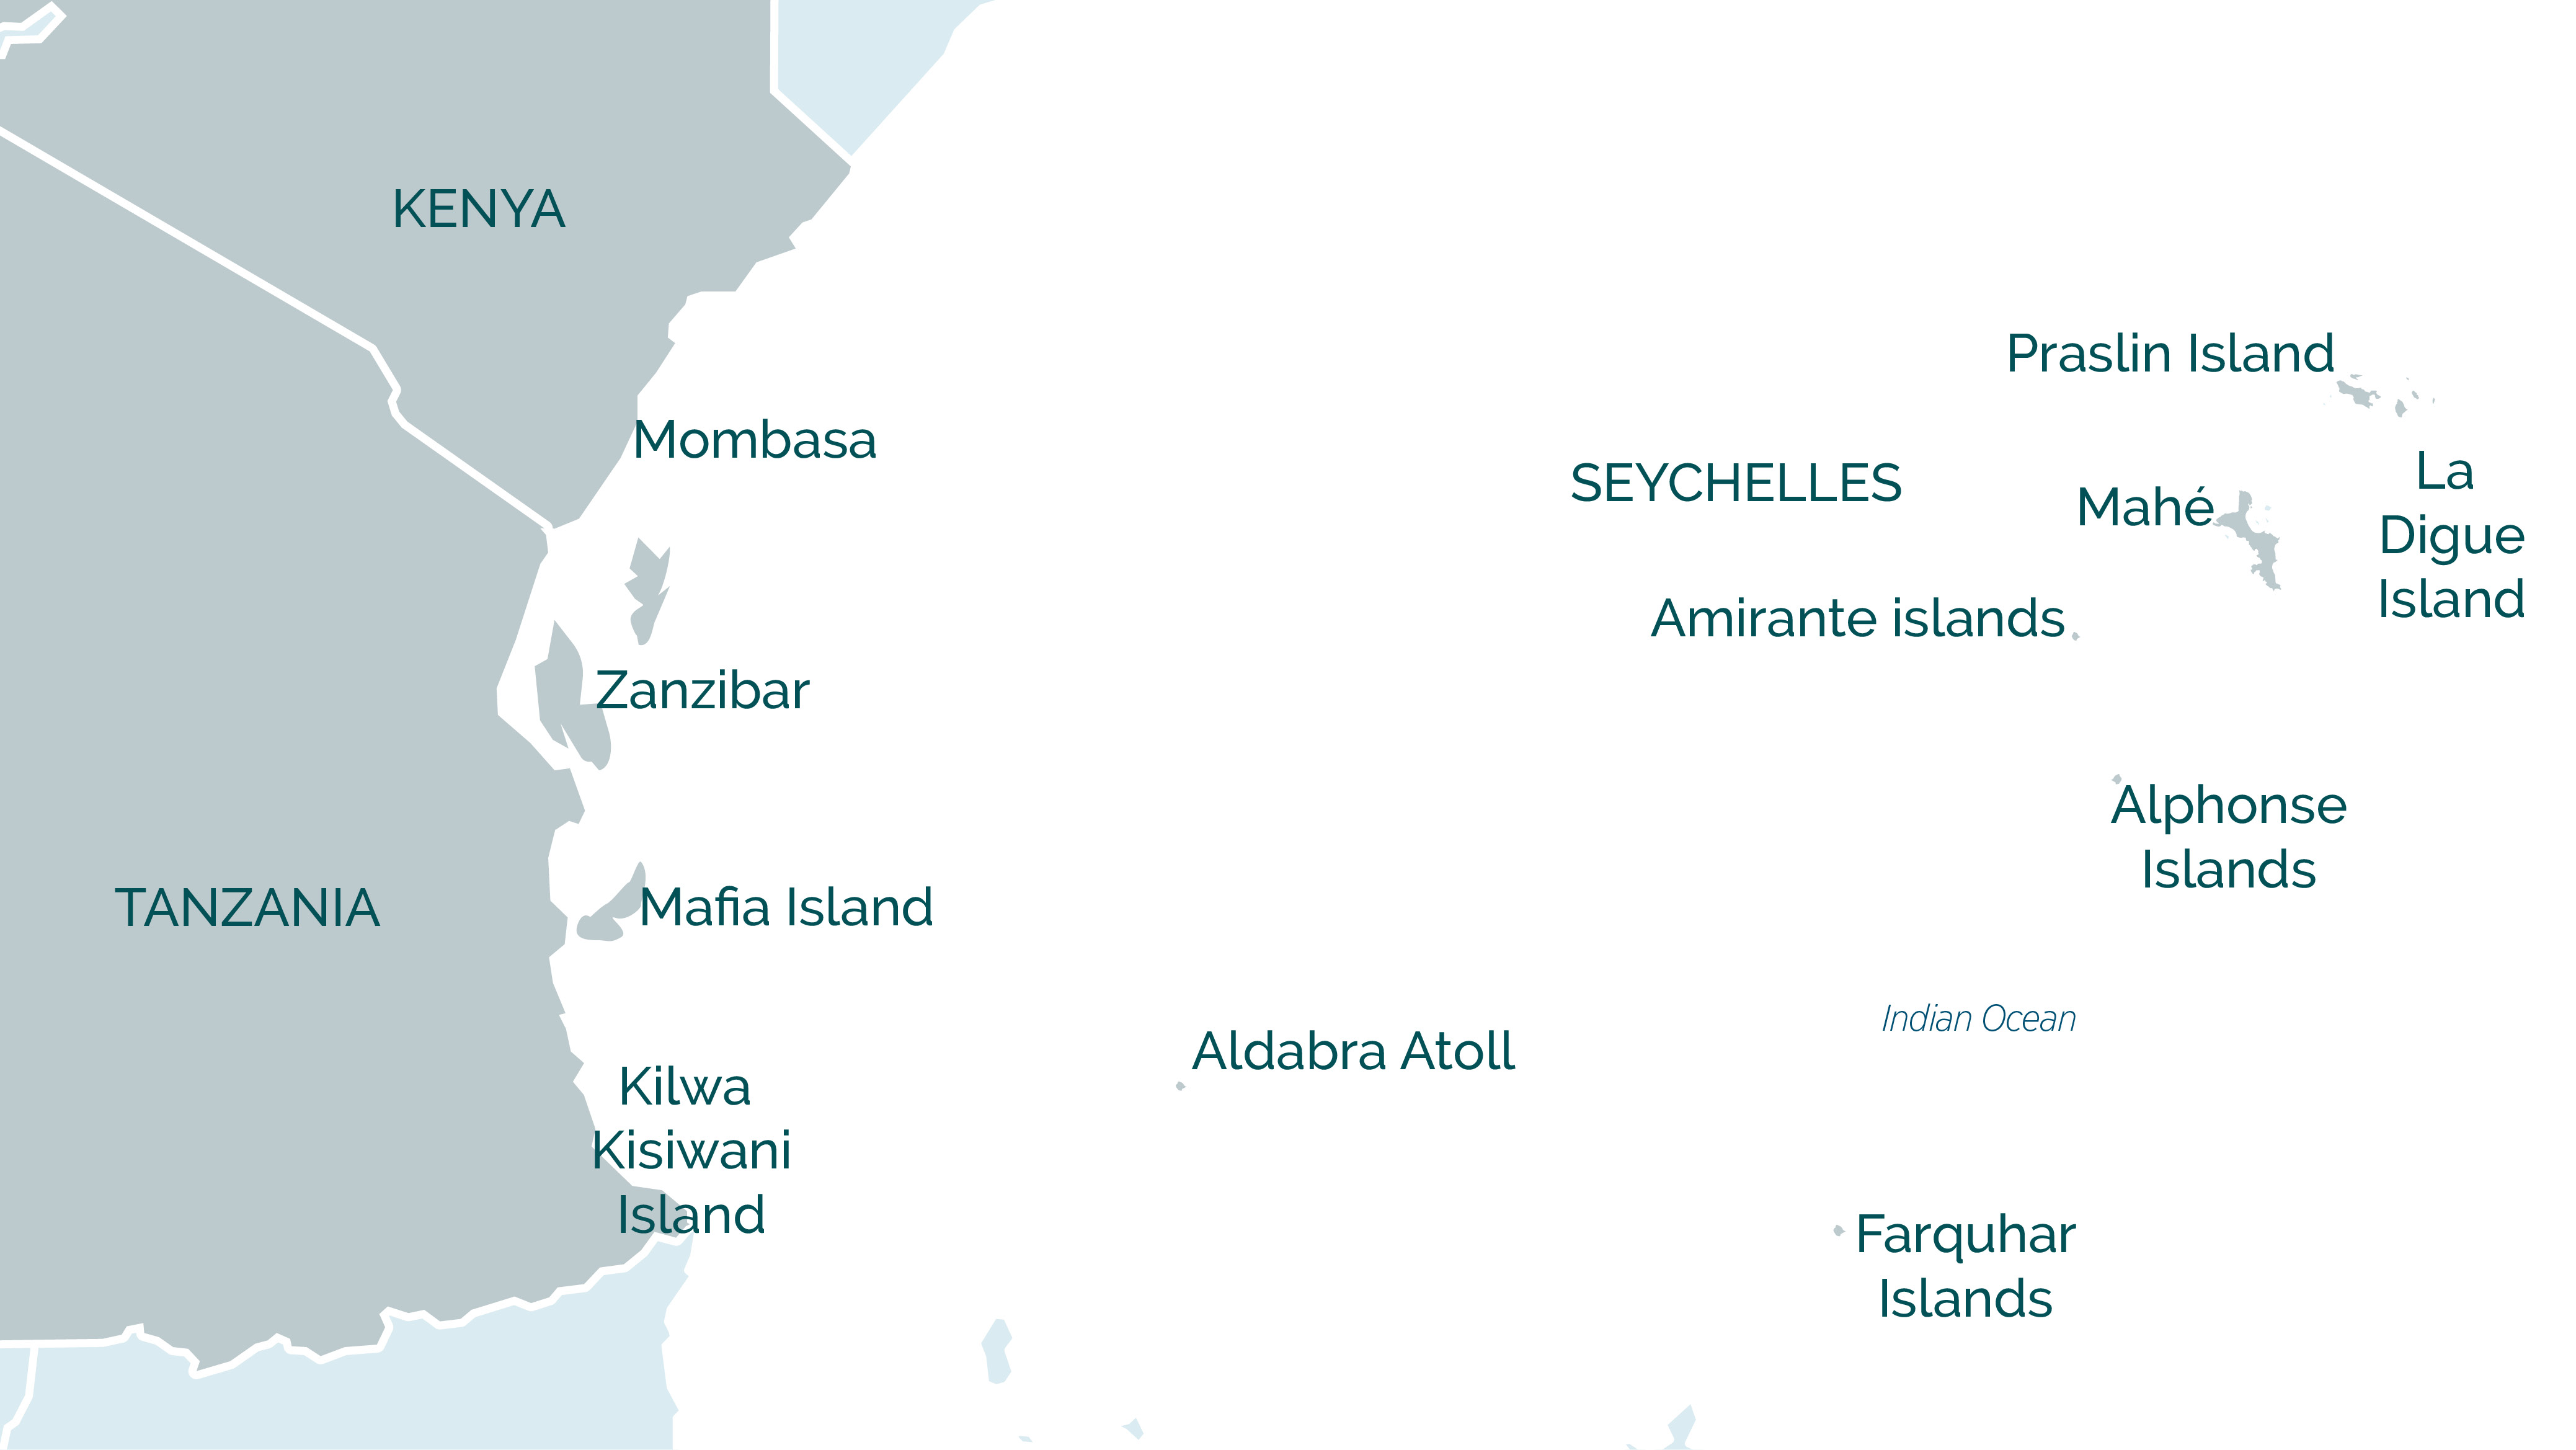 Map of the Seychelles Archipelago, the Indian Ocean and the African Coast including the Farquhar Islands, the Amirante Islands, Kilwa Kisiwani Island, Therese Island, the Alphonse Islands and more.